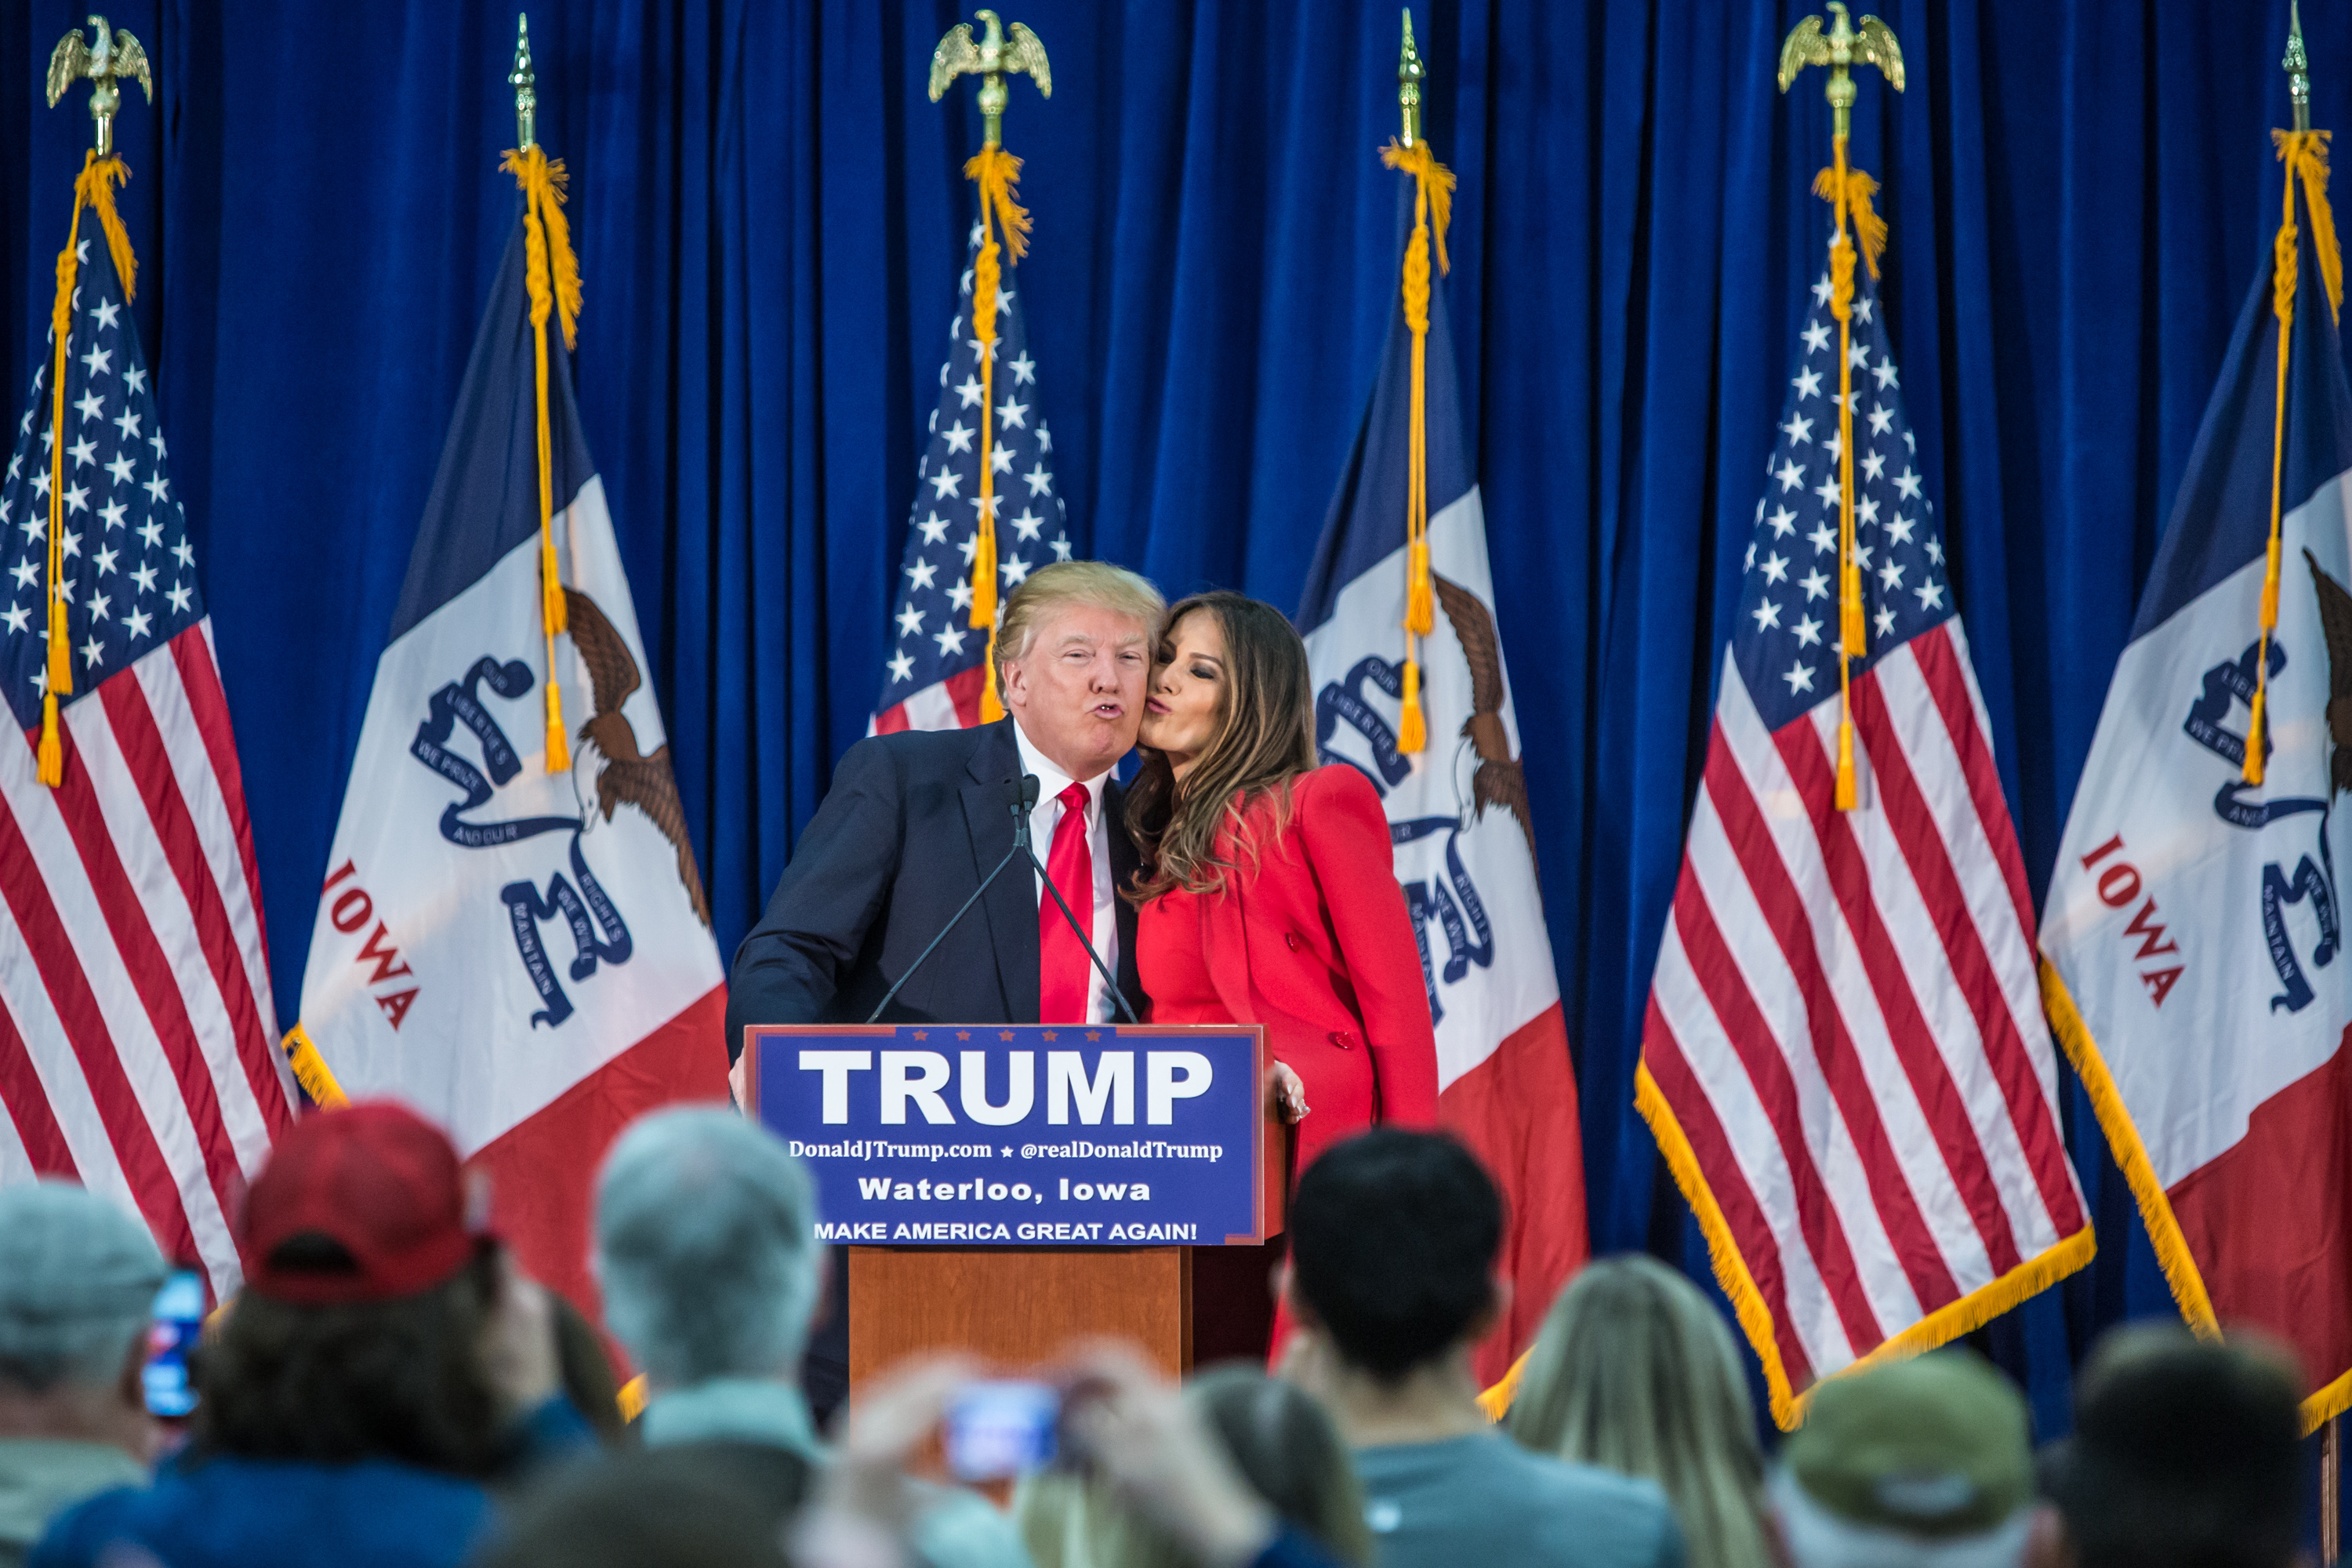 Republican presidential candidate Donald Trump, left, is greeted by his wife Melania Trump at a campaign rally at the Ramada Waterloo Hotel and Convention Center on February 1, 2016 in Waterloo, Iowa. (Getty)